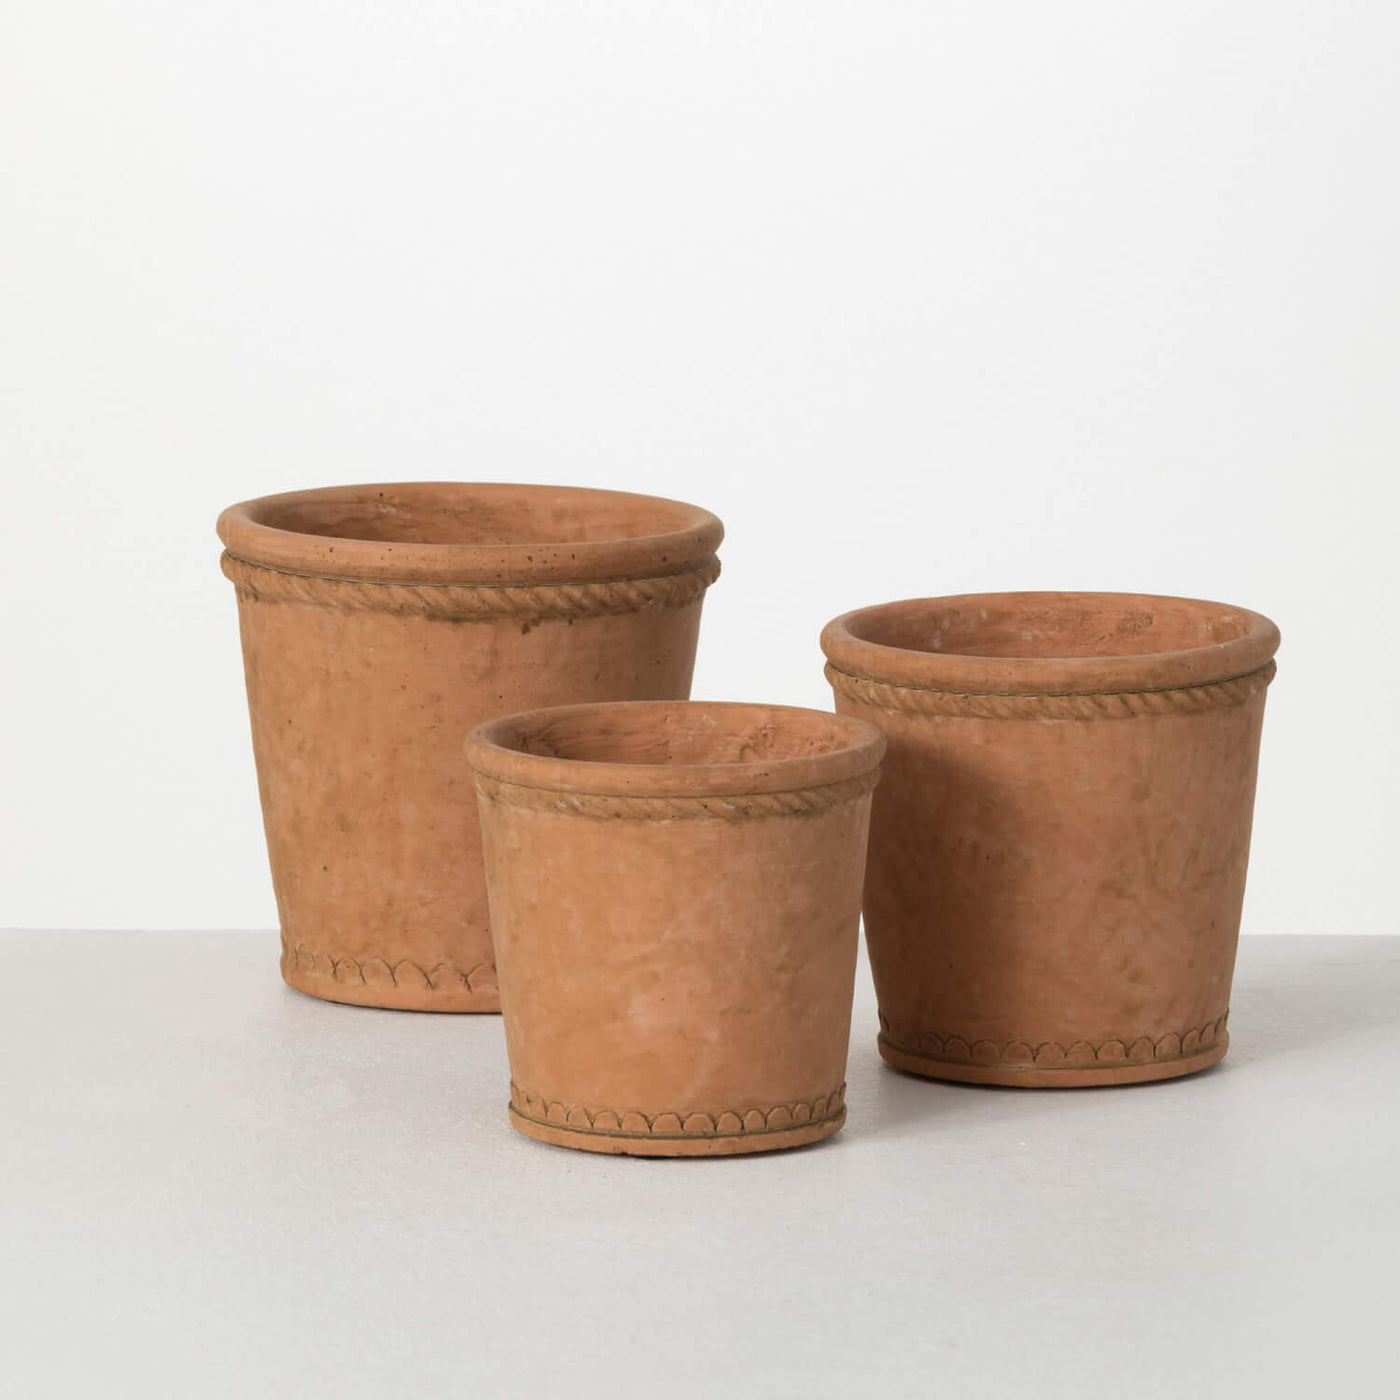 Terracotta style rustic clay colored planter pots  with detailed rope textures